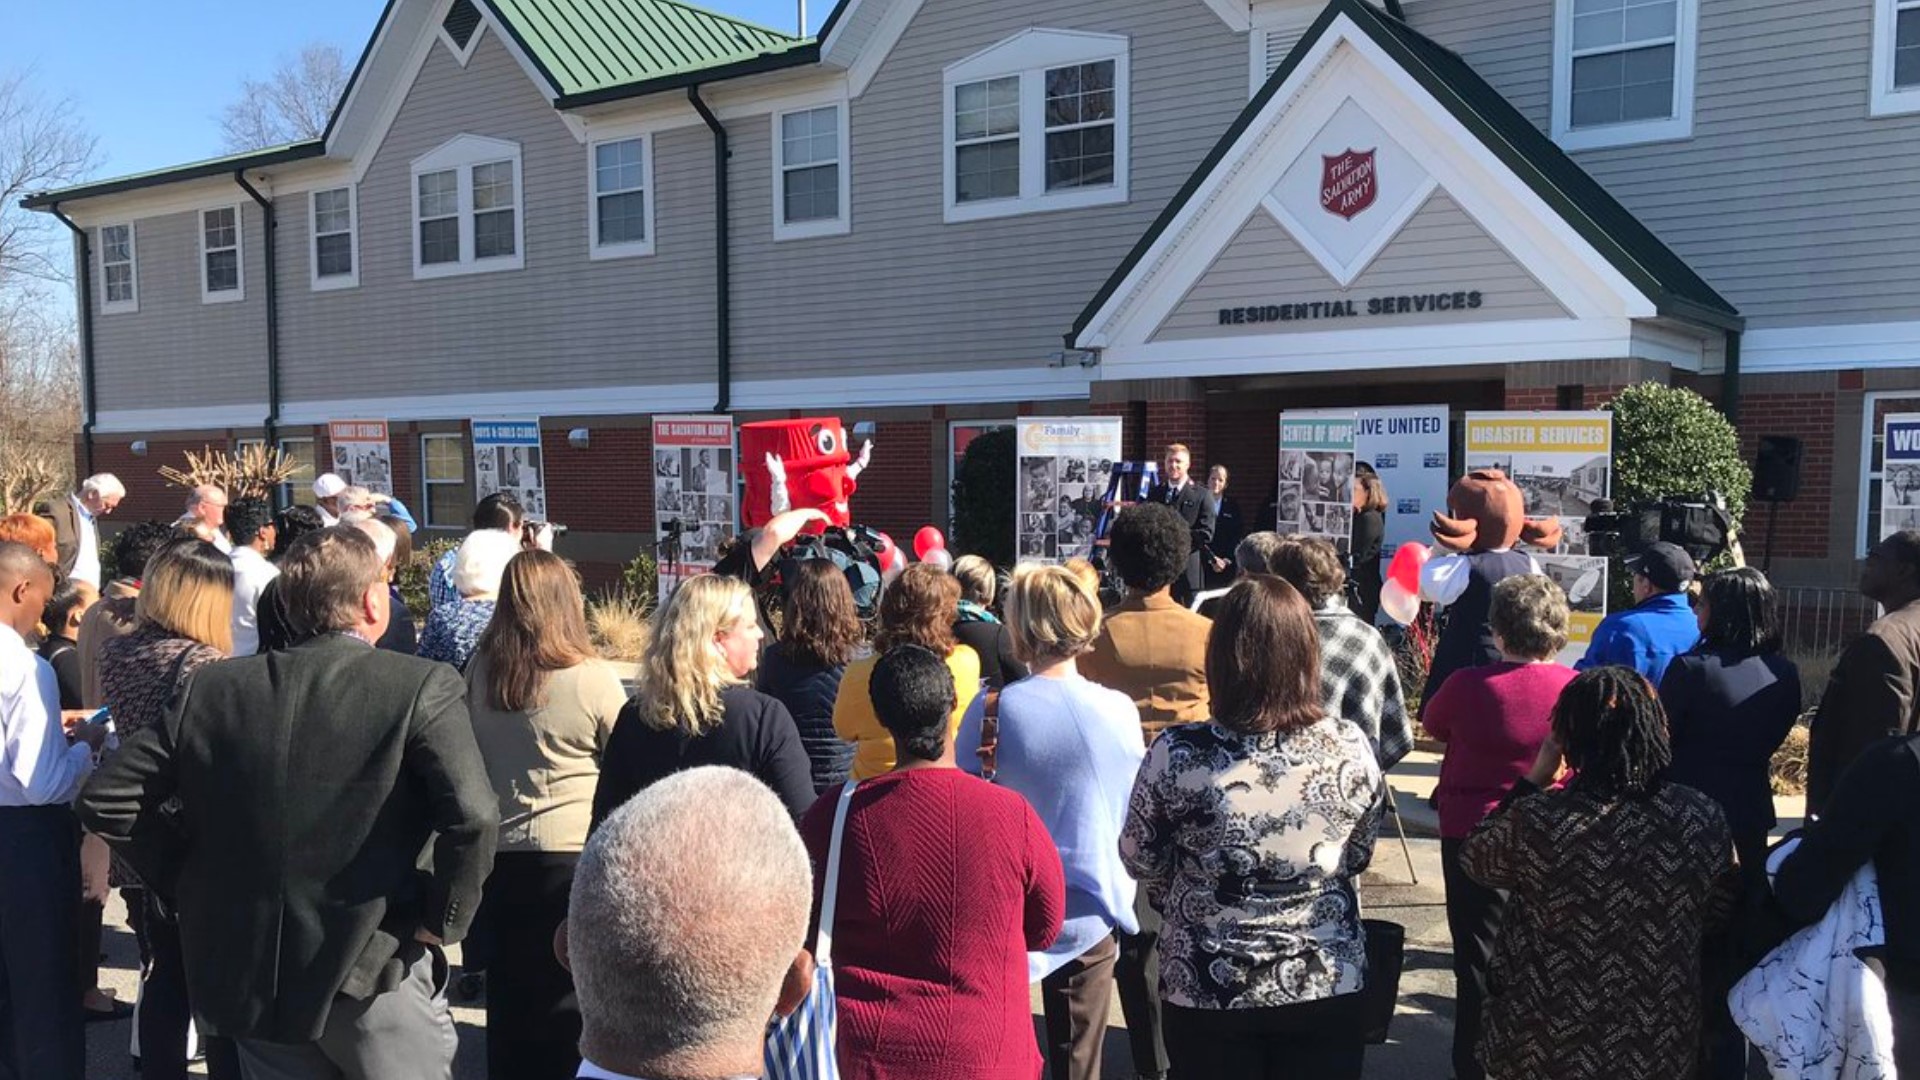 The United Way of Greater Greensboro and the Salvation Army opened its second Family Success Center in Greensboro. The goal is to help families break the cycle of poverty.